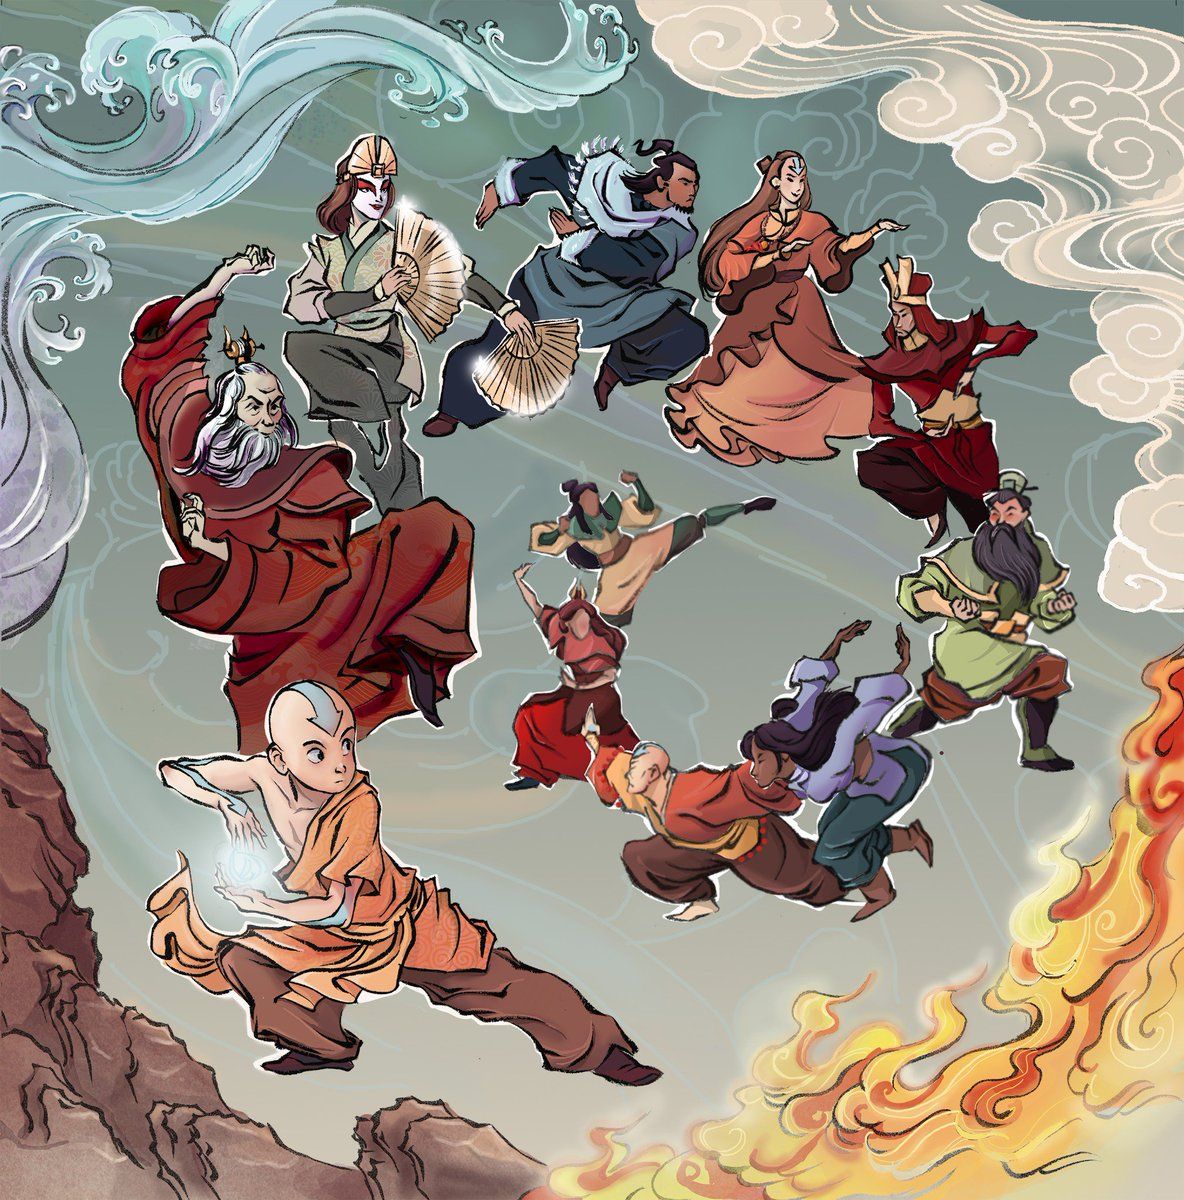 Kyoshi: The Last Airbender Anime Image Board